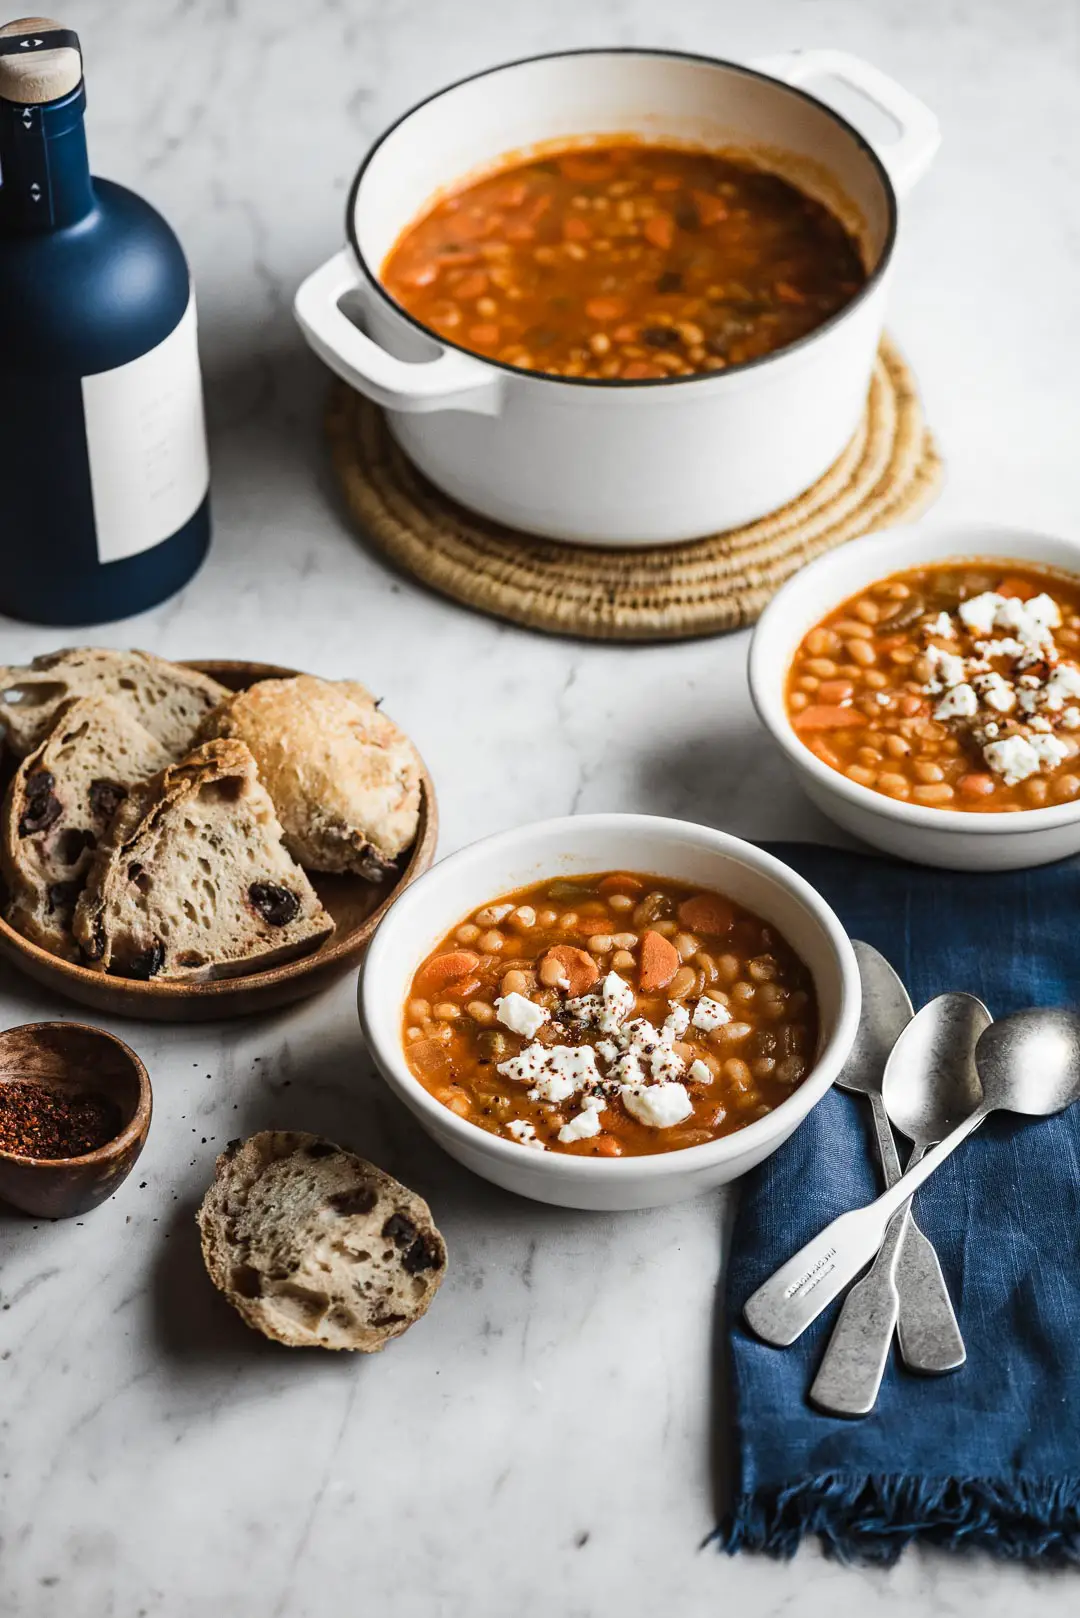 One of the most beloved Greek recipes, Fasolada - Greek White Bean Soup is a simple, nourishing comfort food that pairs beautifully with a bit of crumbled feta, olives, and crusty bread.